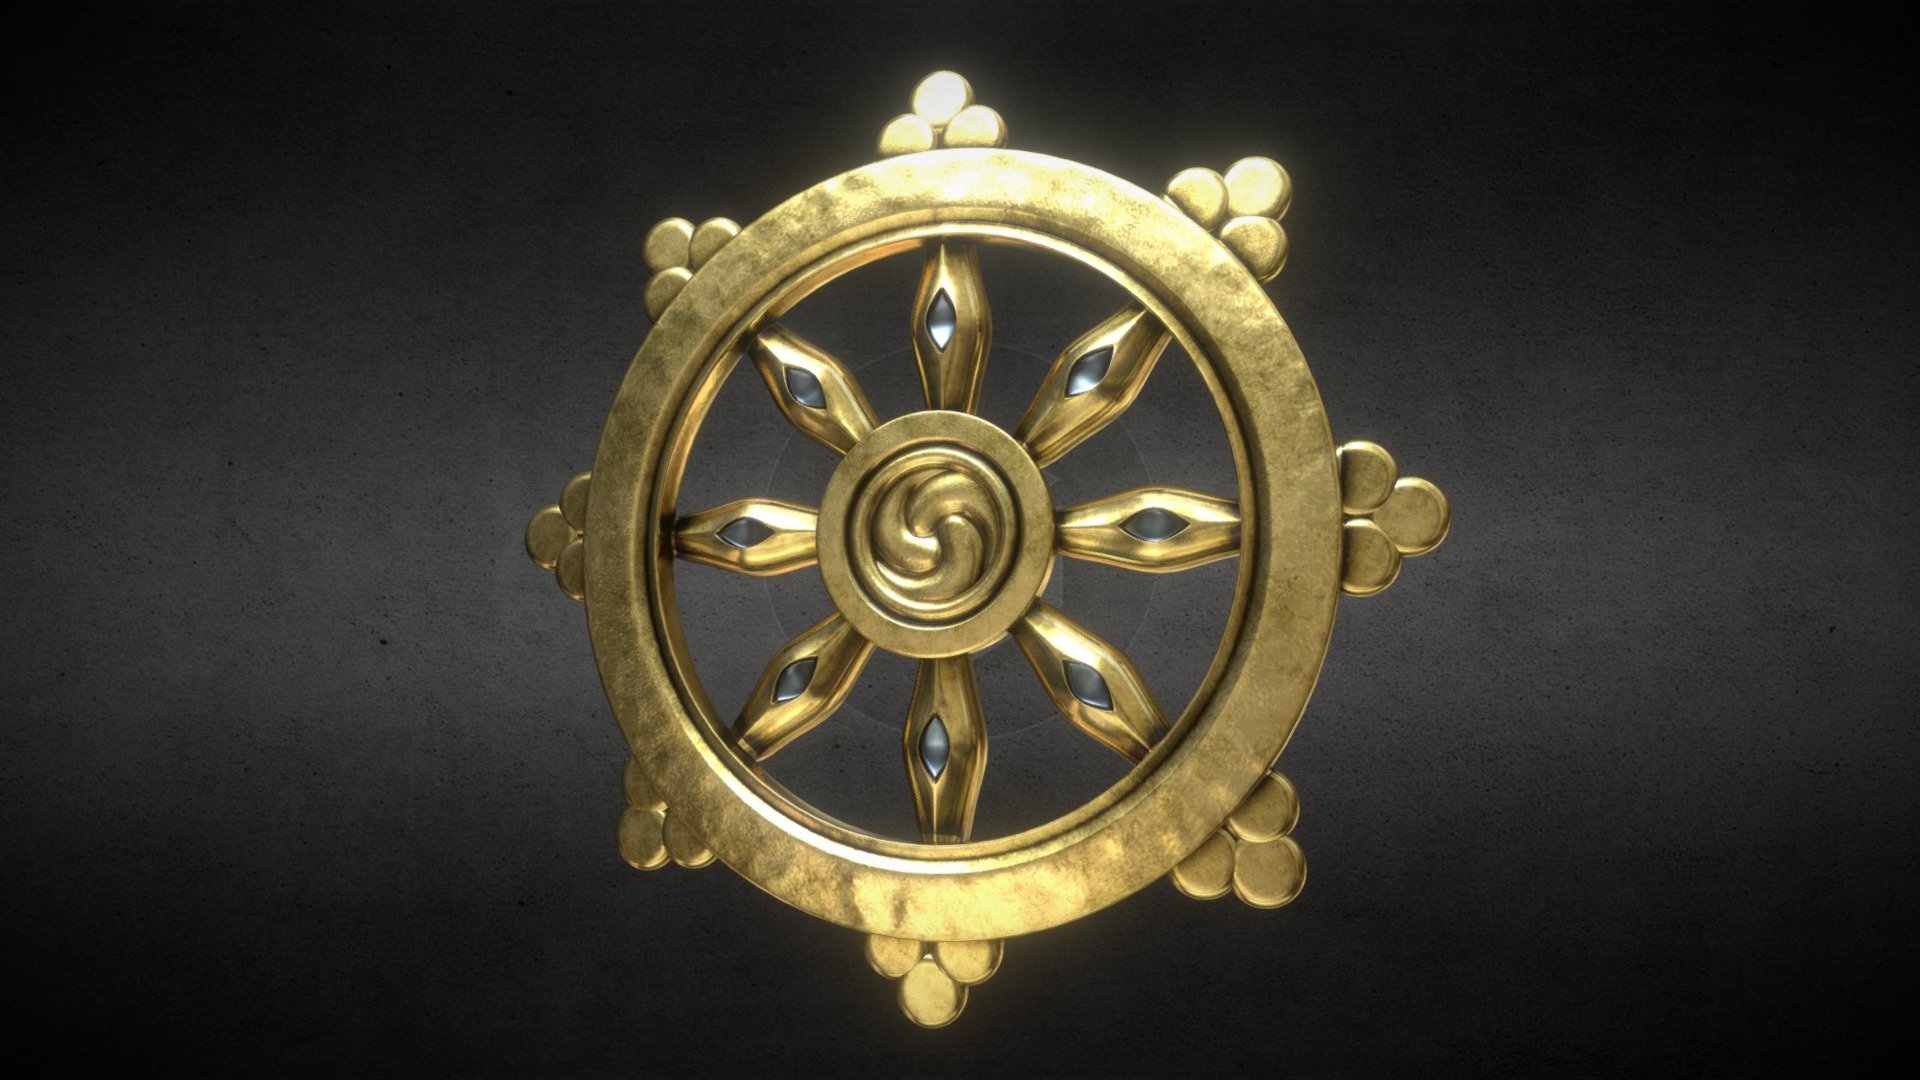 Dhamma Wheel of buddhist iconography, made in blender textured in substance painter. Suitable for architecture visualization 3d model